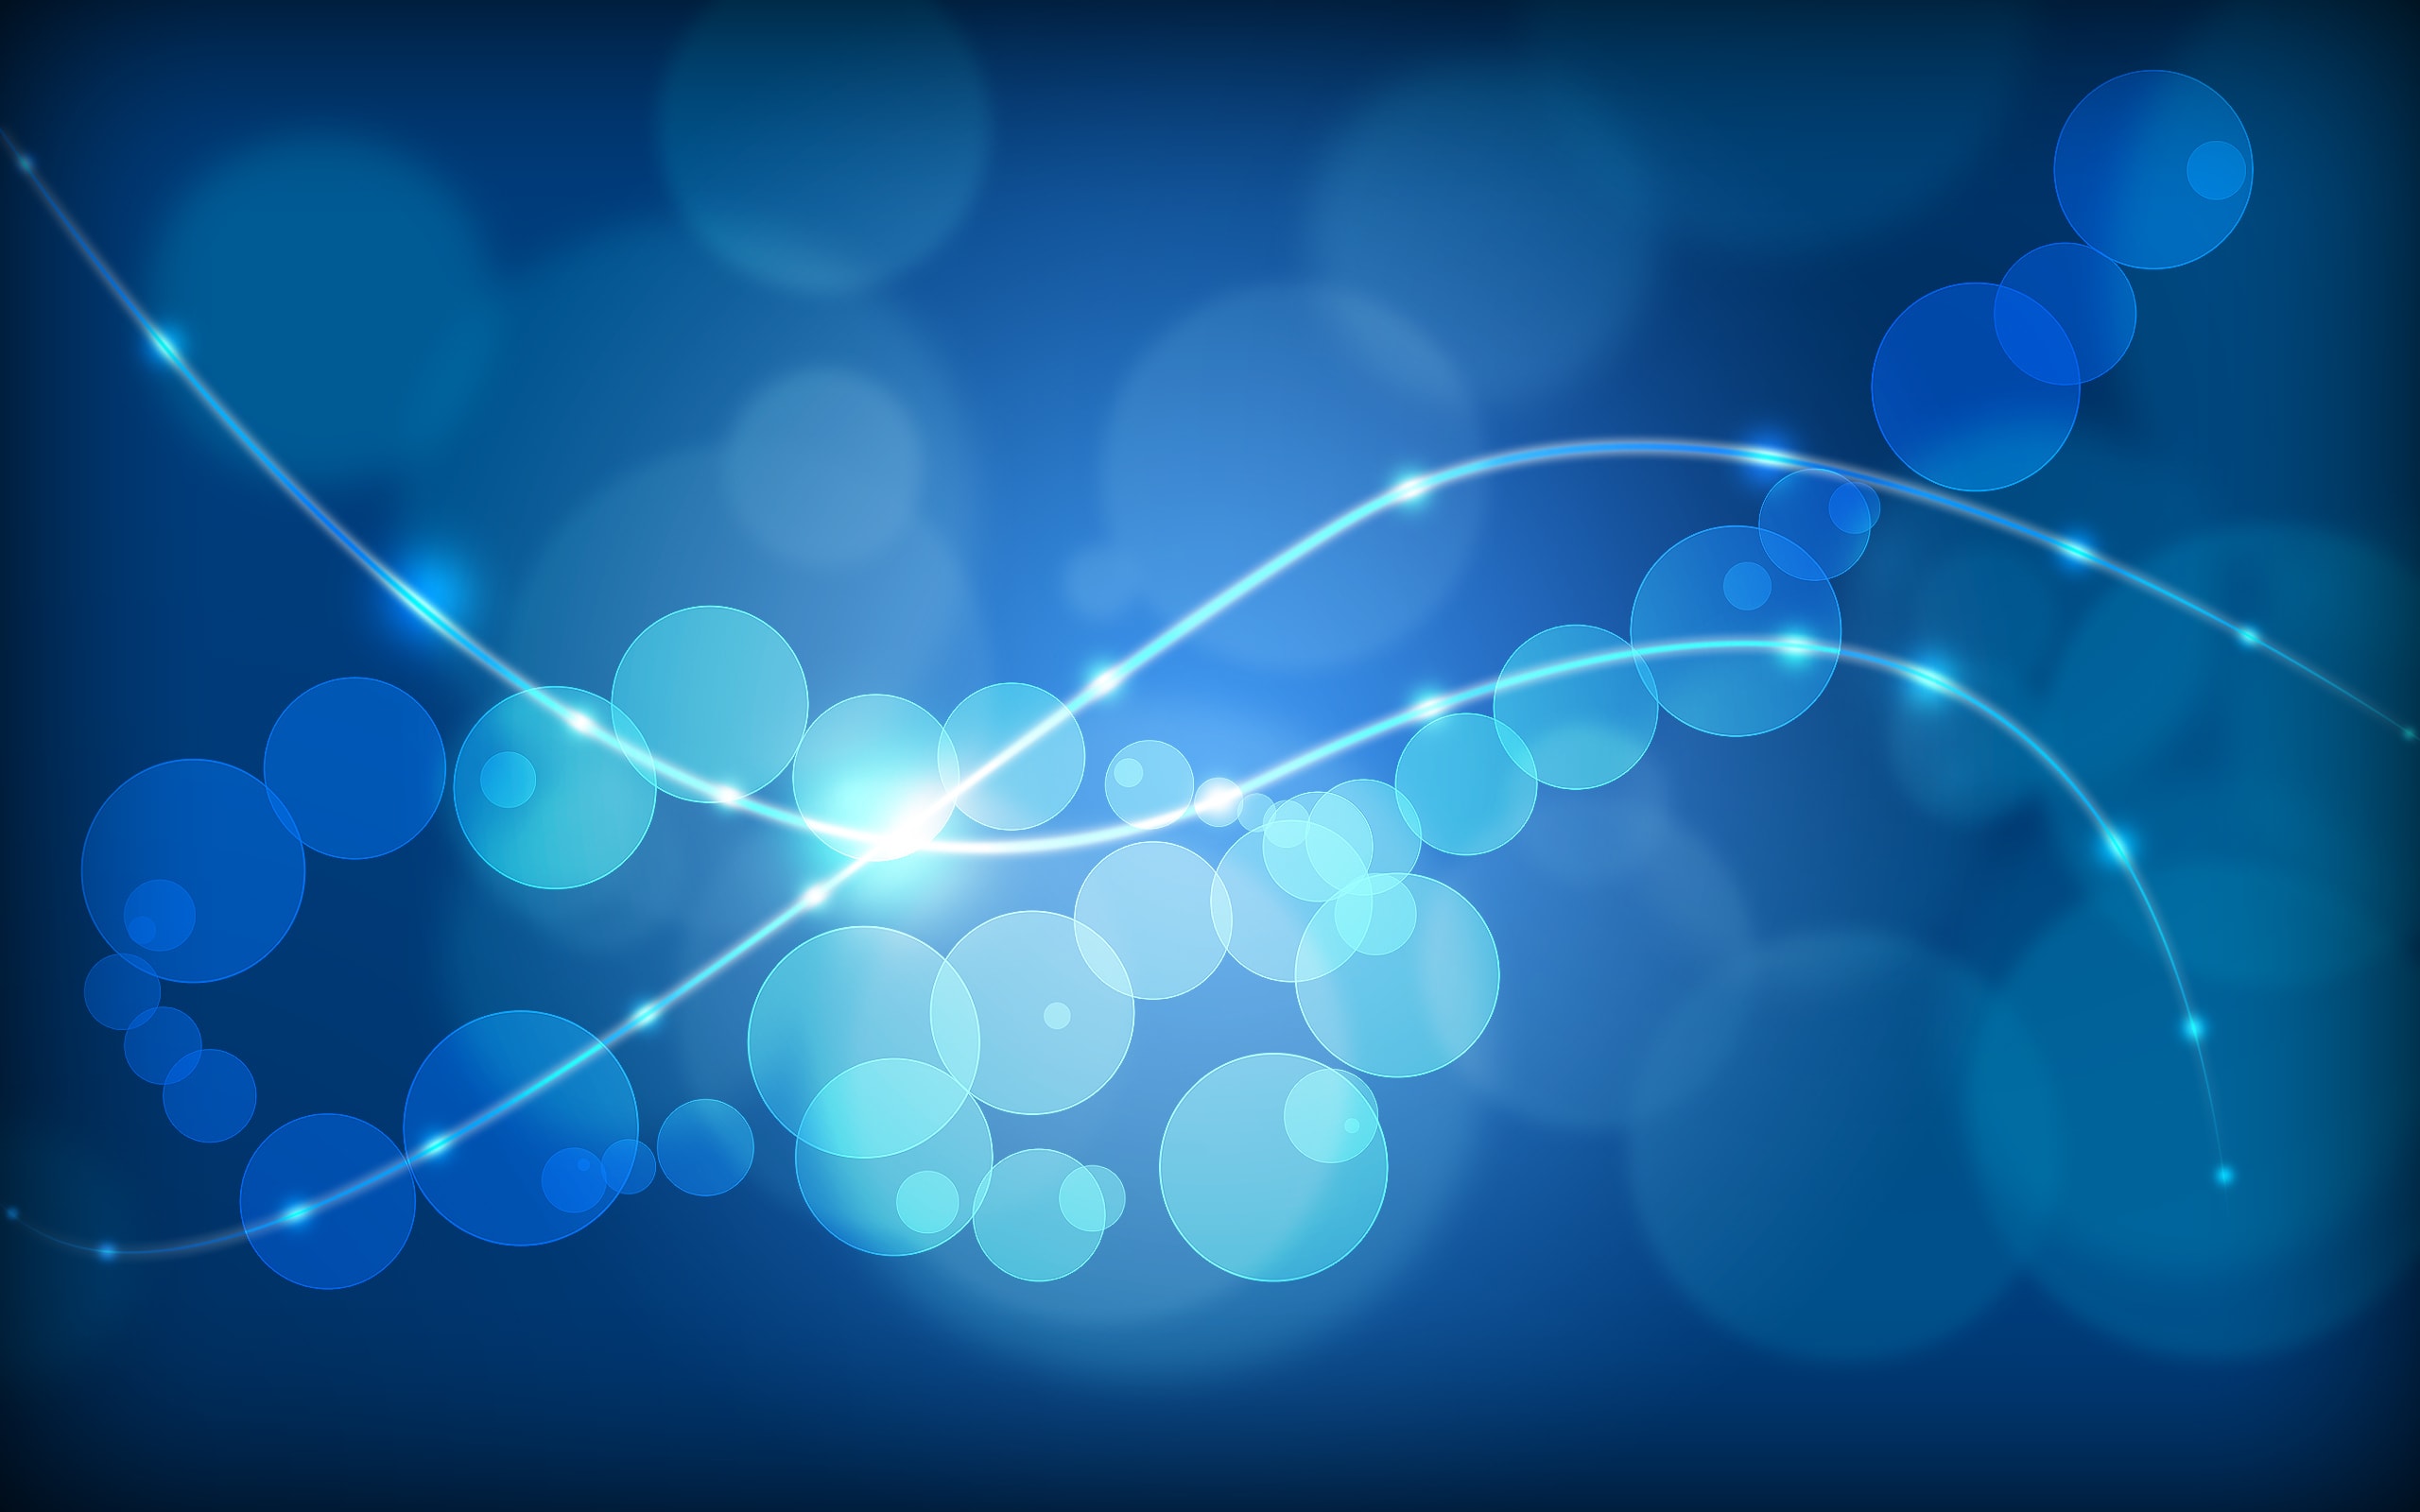 Ultra HD Wallpaper Background Blue And Abstract Circle